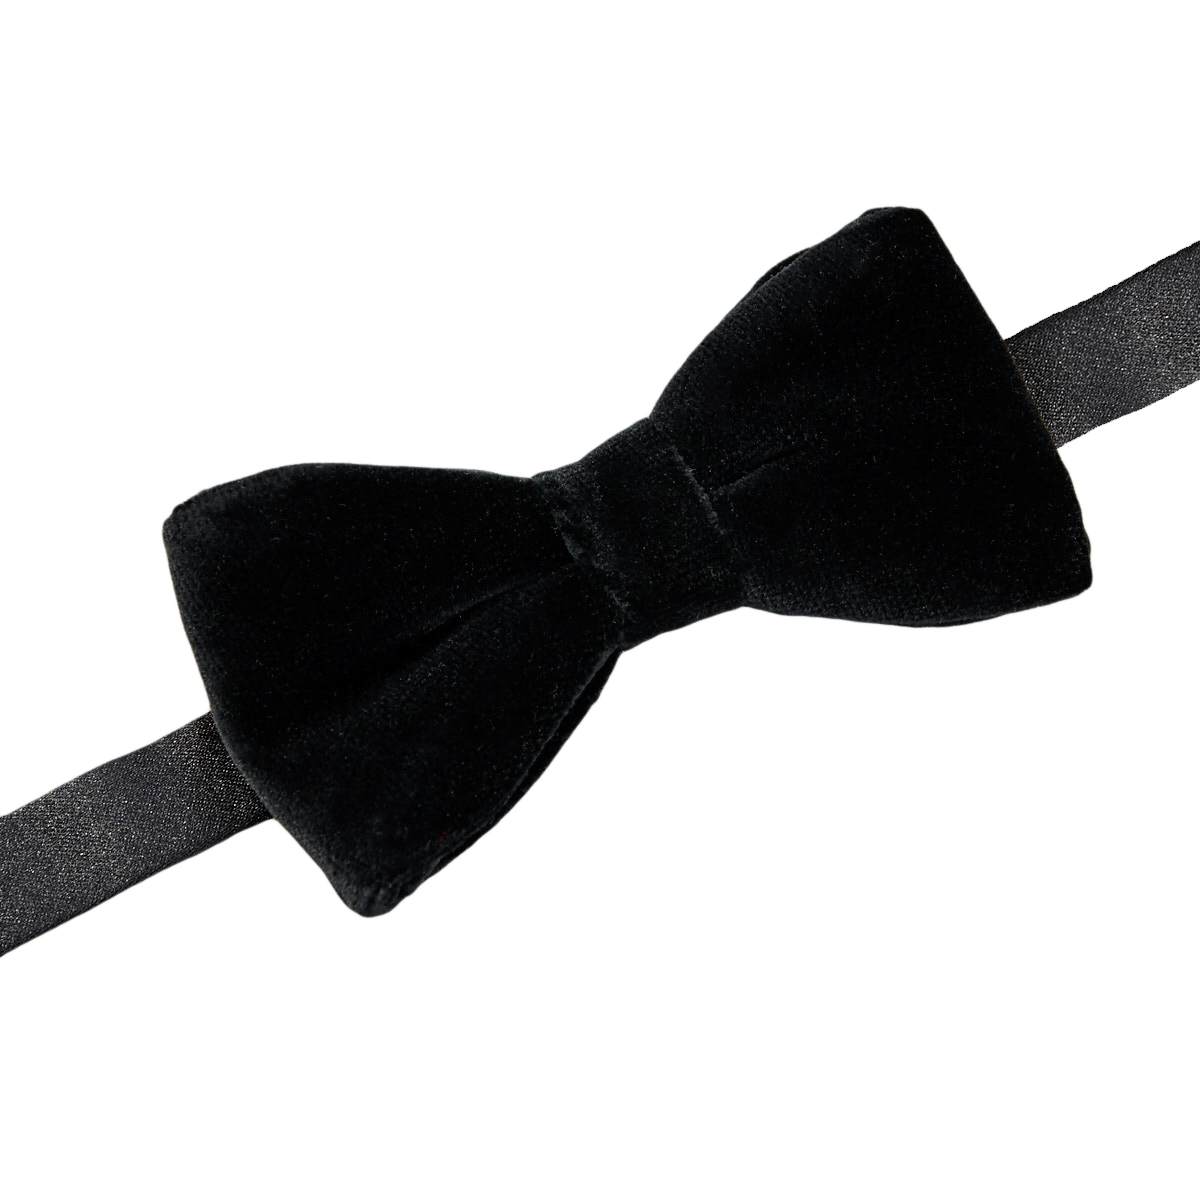 An Amanda Christensen Black Velvet Cotton Pre Tied Bow Tie on a white background offers a formal look.